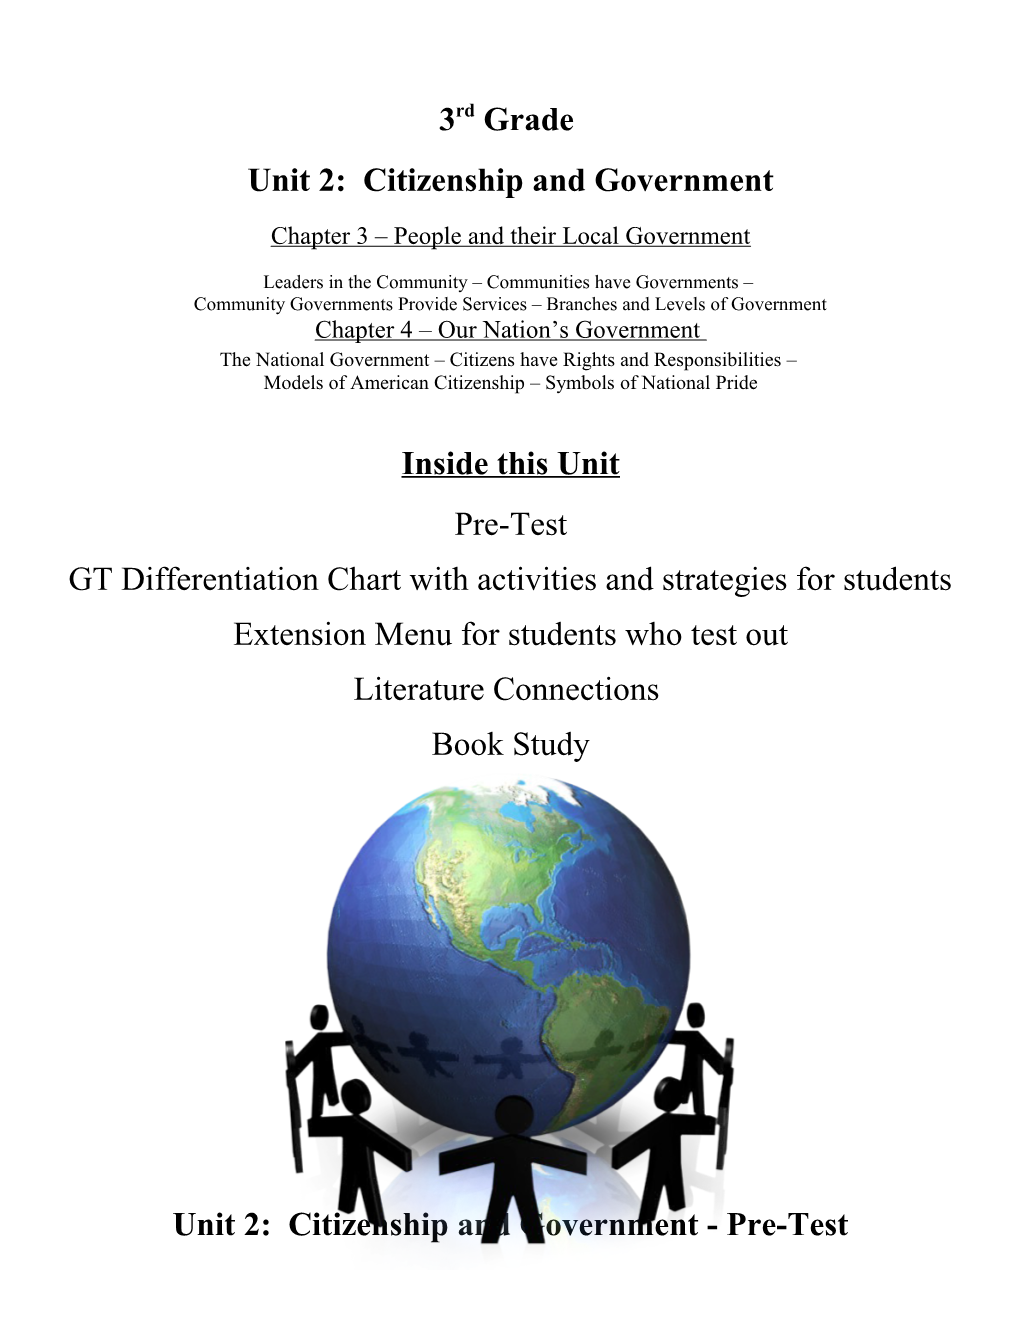 Unit 2: Citizenship and Government